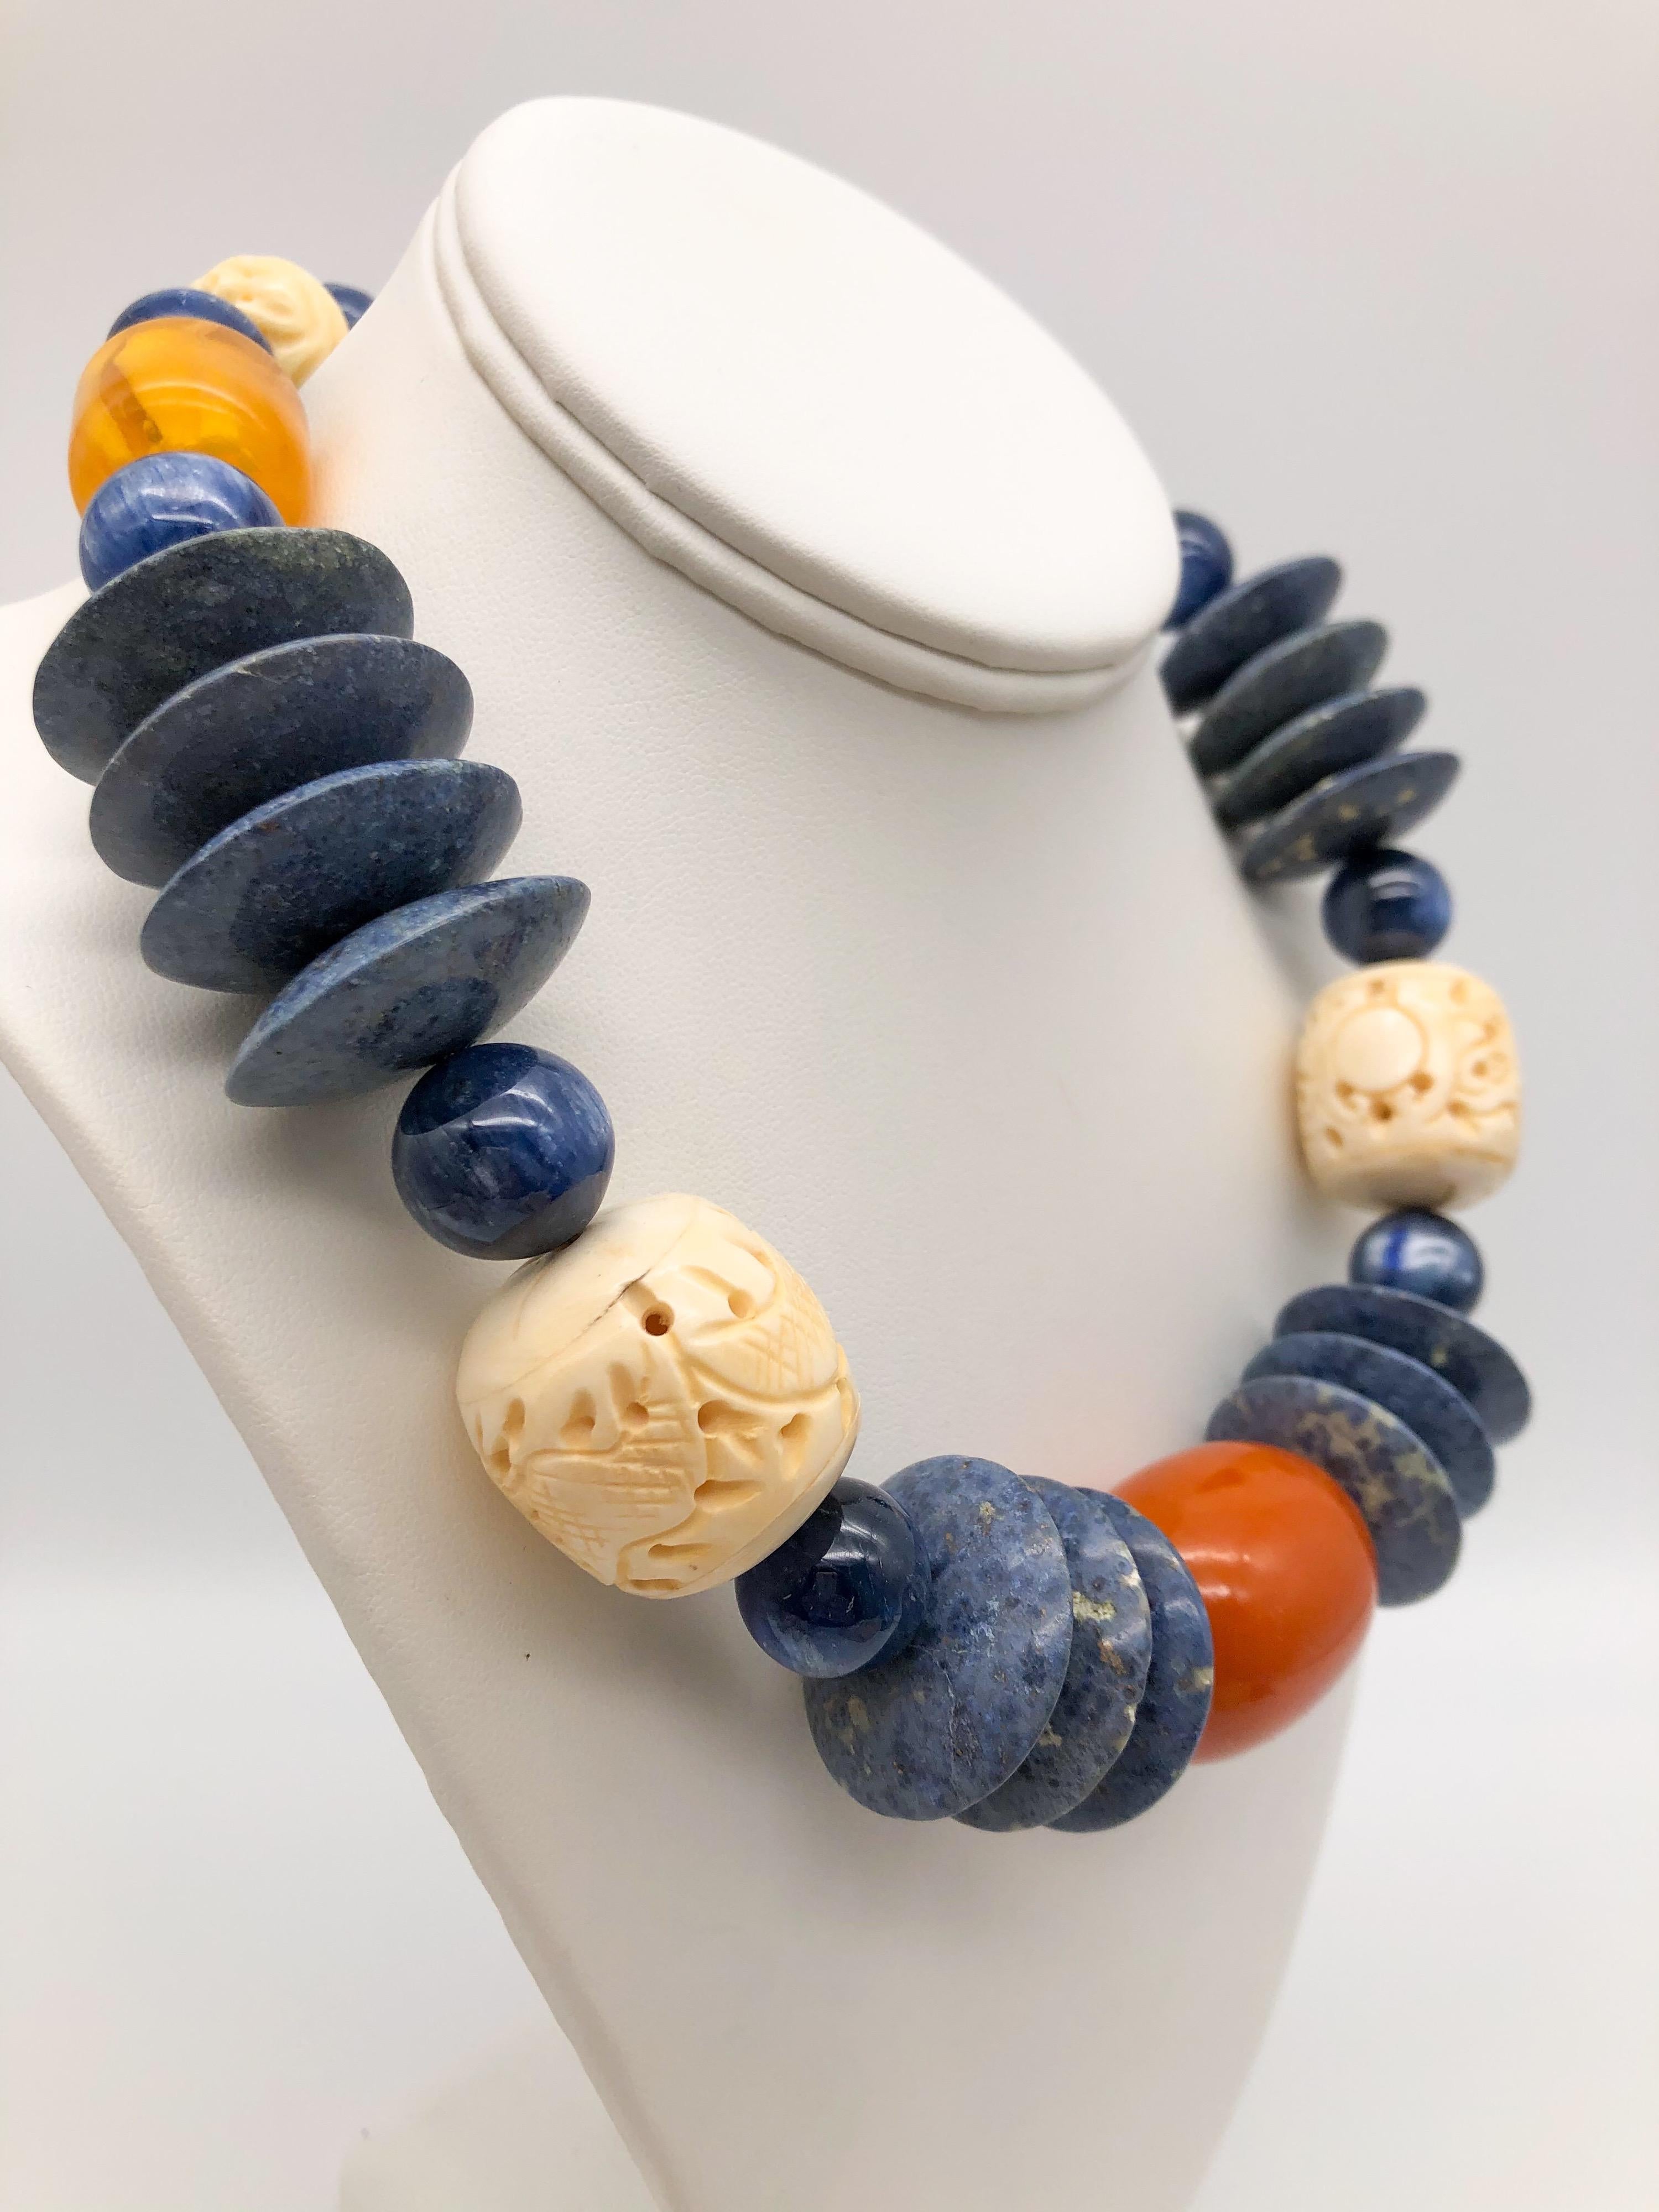 One-of-a-Kind
Not to mention the carved Chinese bone that adds personality to the assemblage of round polished kyanite beads mixed with paler sodalite discs interspersed with Copal (amber of a certain age) and large carved Chinese beads. The clasp,